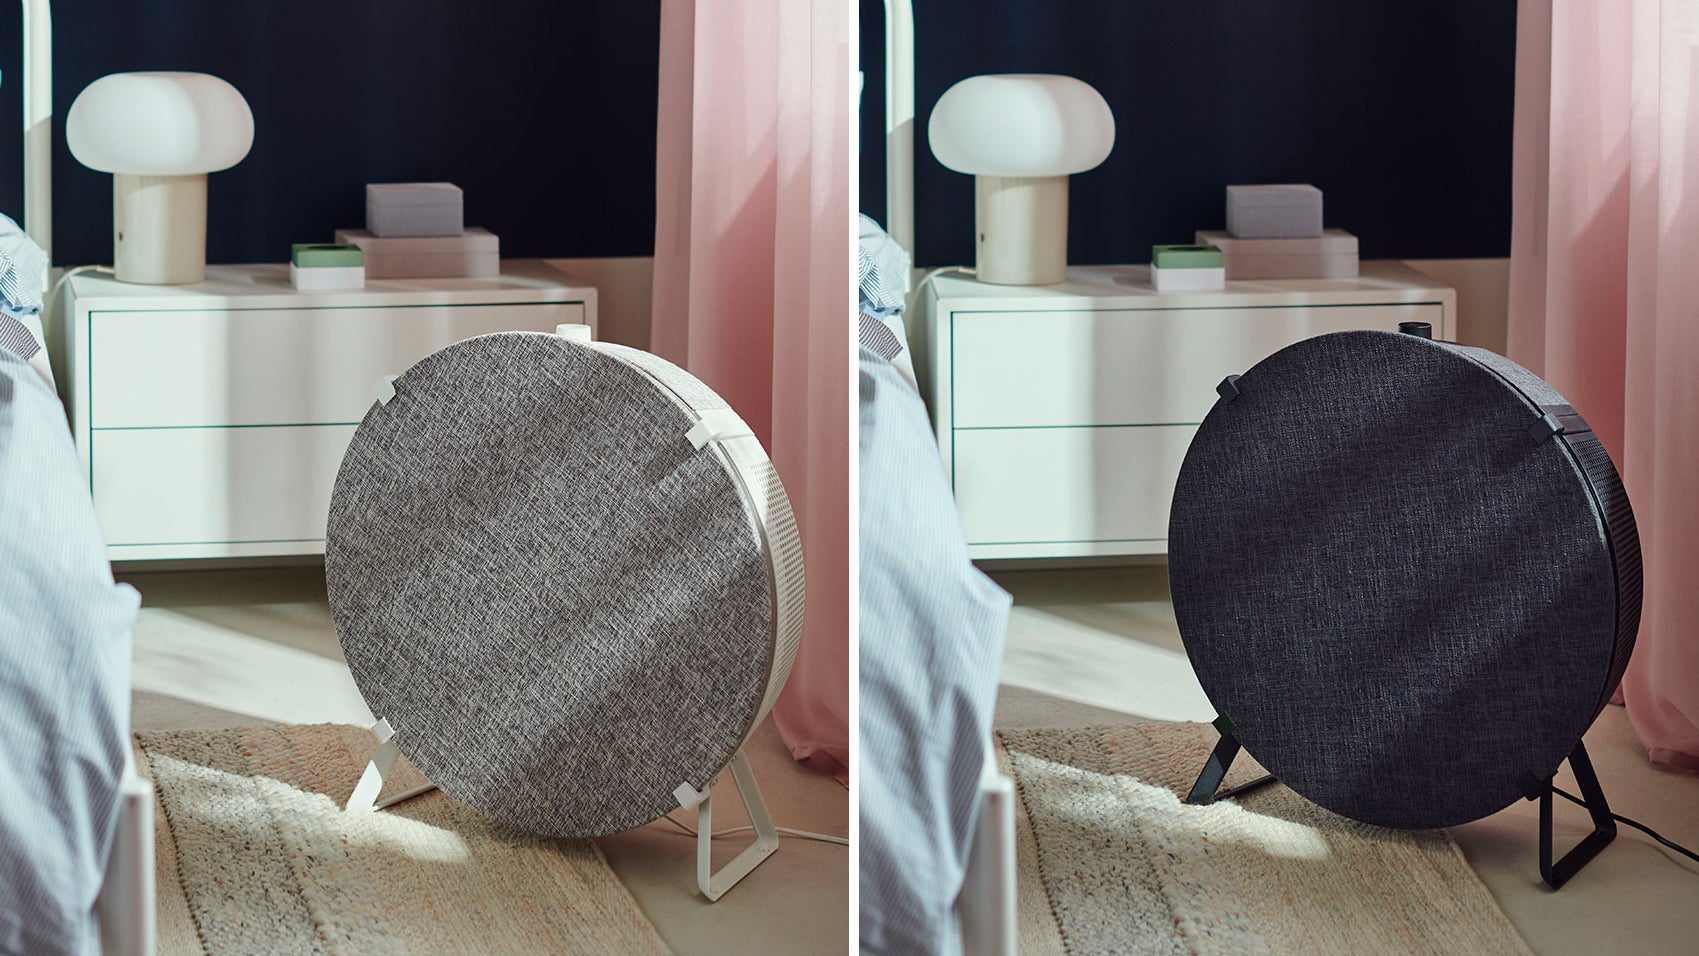 The standalone version of the Starkvind looks like an abandoned kick drum, but does have a smaller footprint than the side table model. (Image: IKEA)